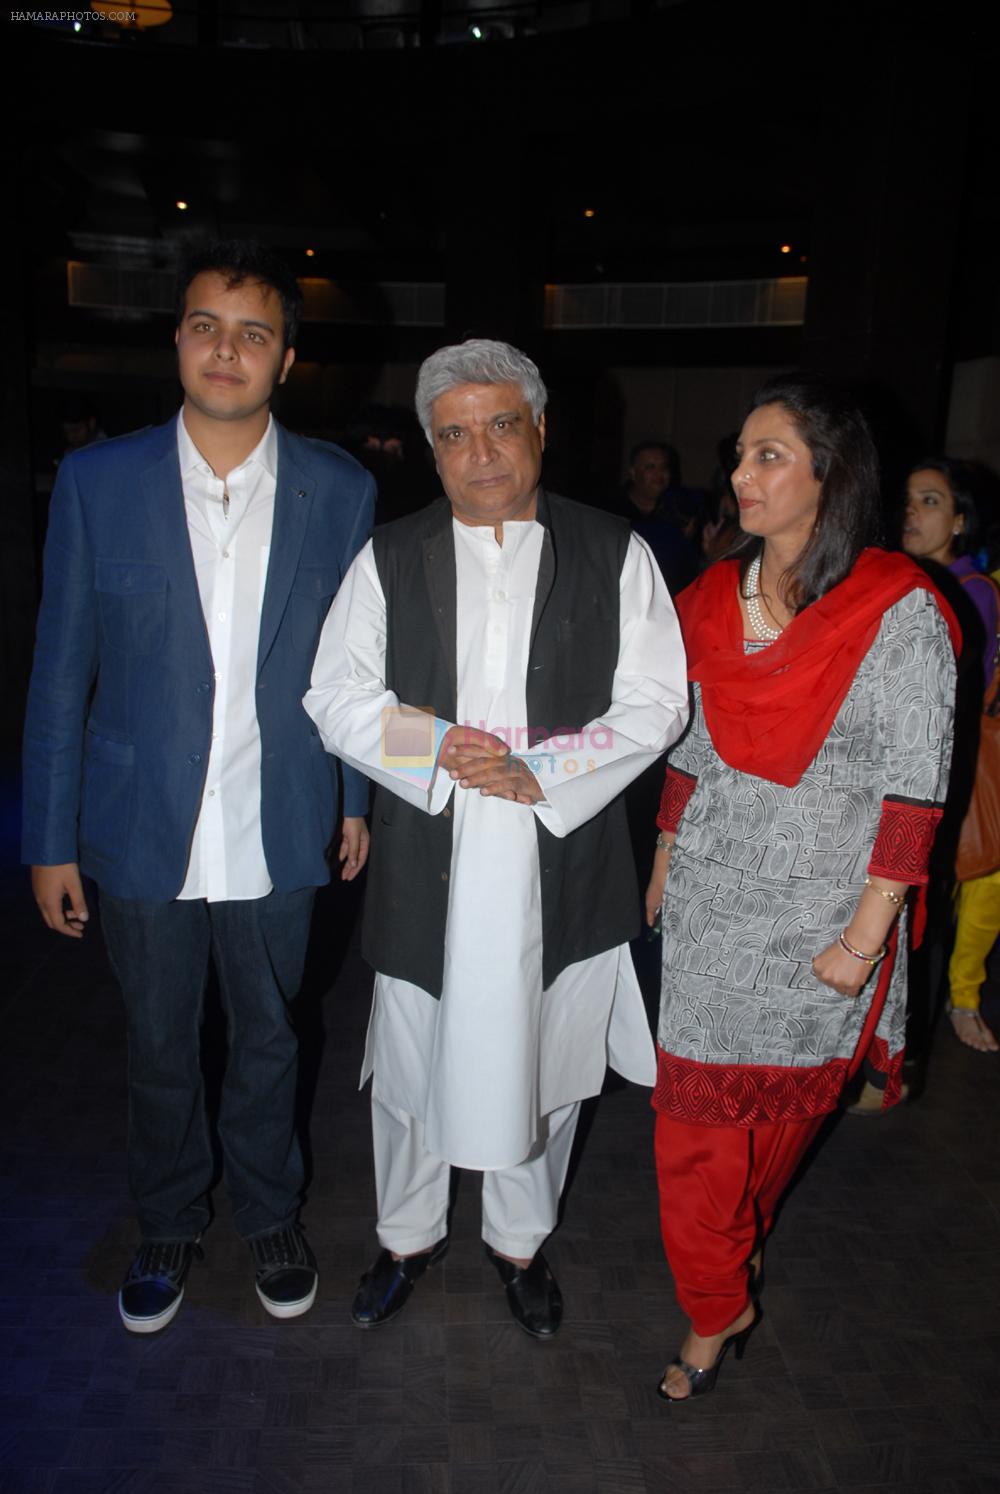 Azaan Khan, Javed Akhtar and Praveen Khan at the launch of singer Azaan Khan's debut album Philo- sufi in New Delhi on 30th March 2012